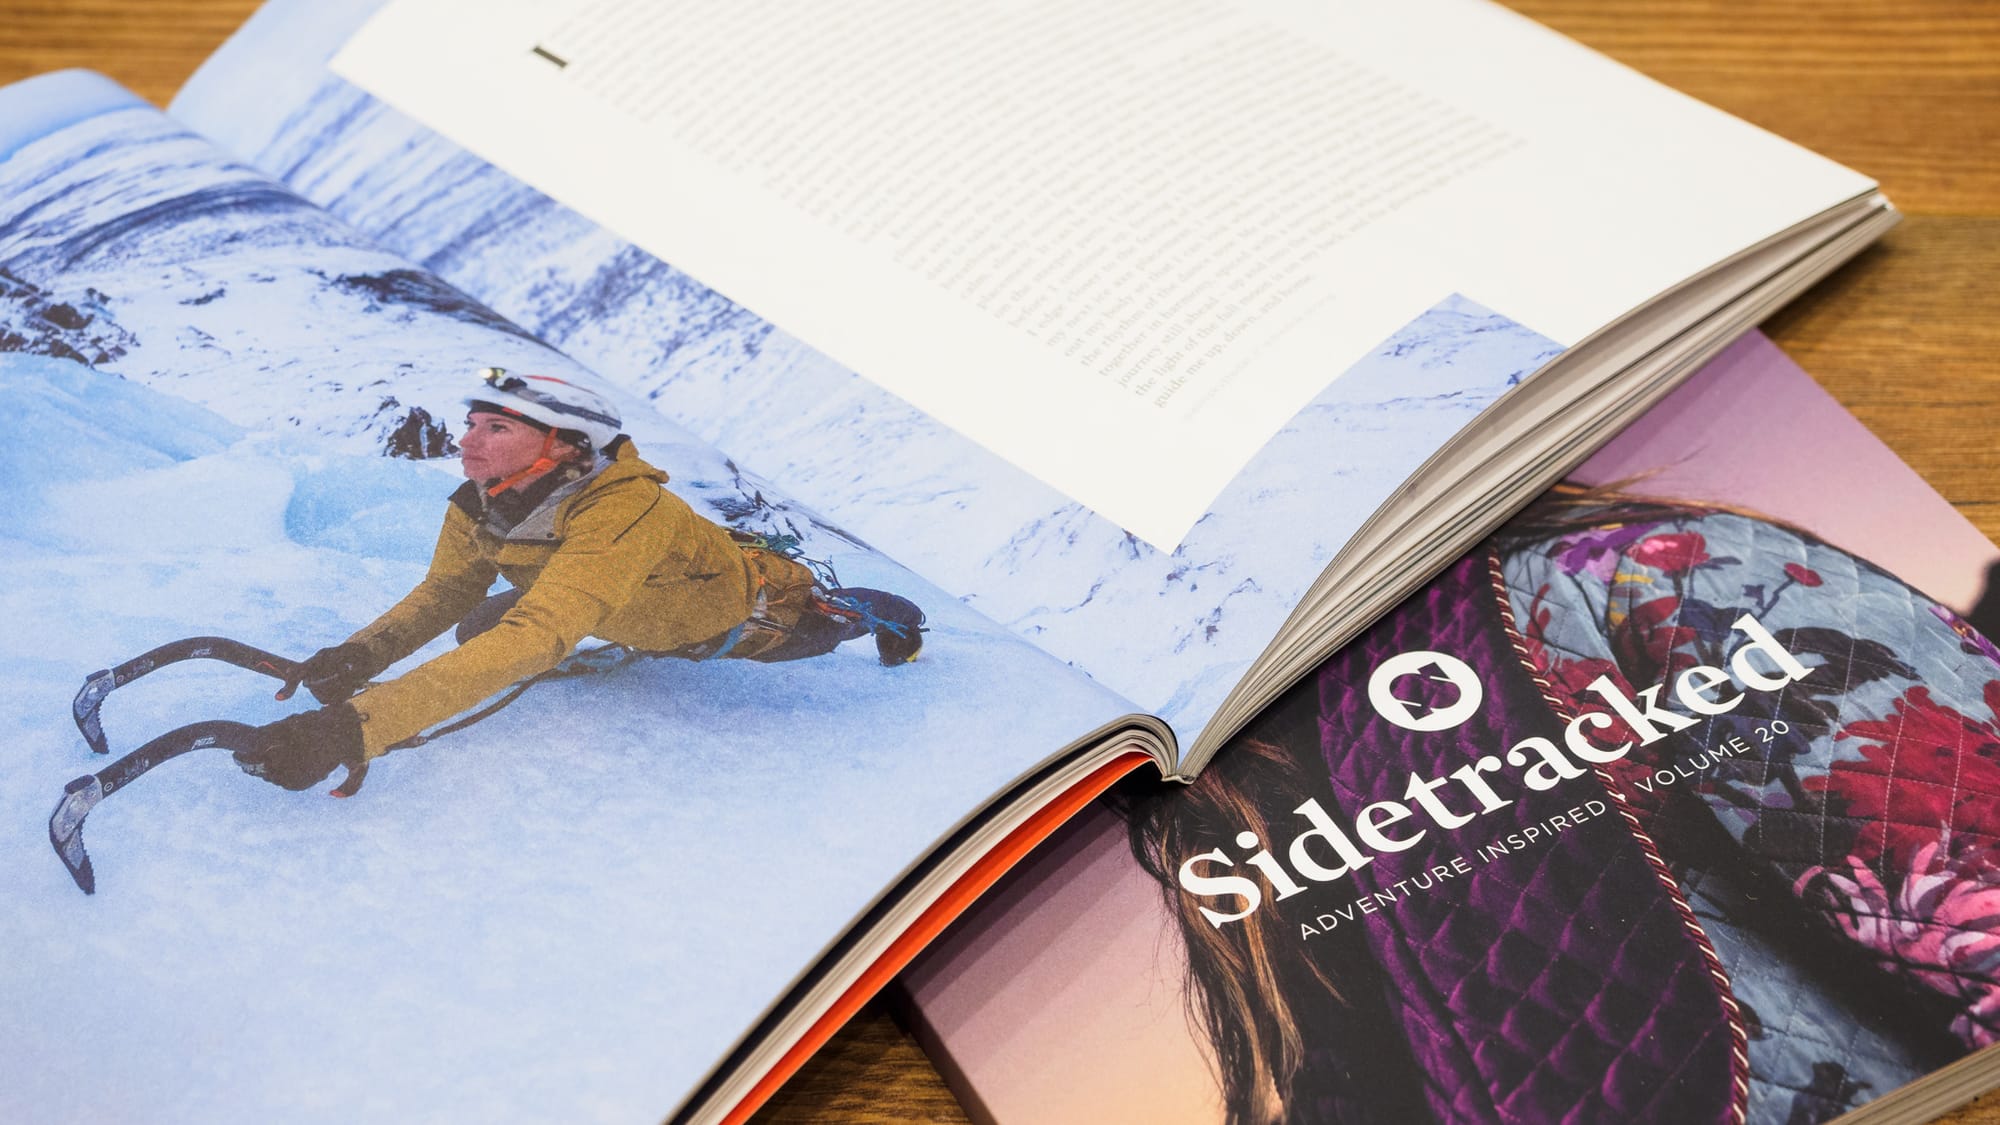 Sidetracked Volume 30: the Art of the Journey, and a look back at a decade in print